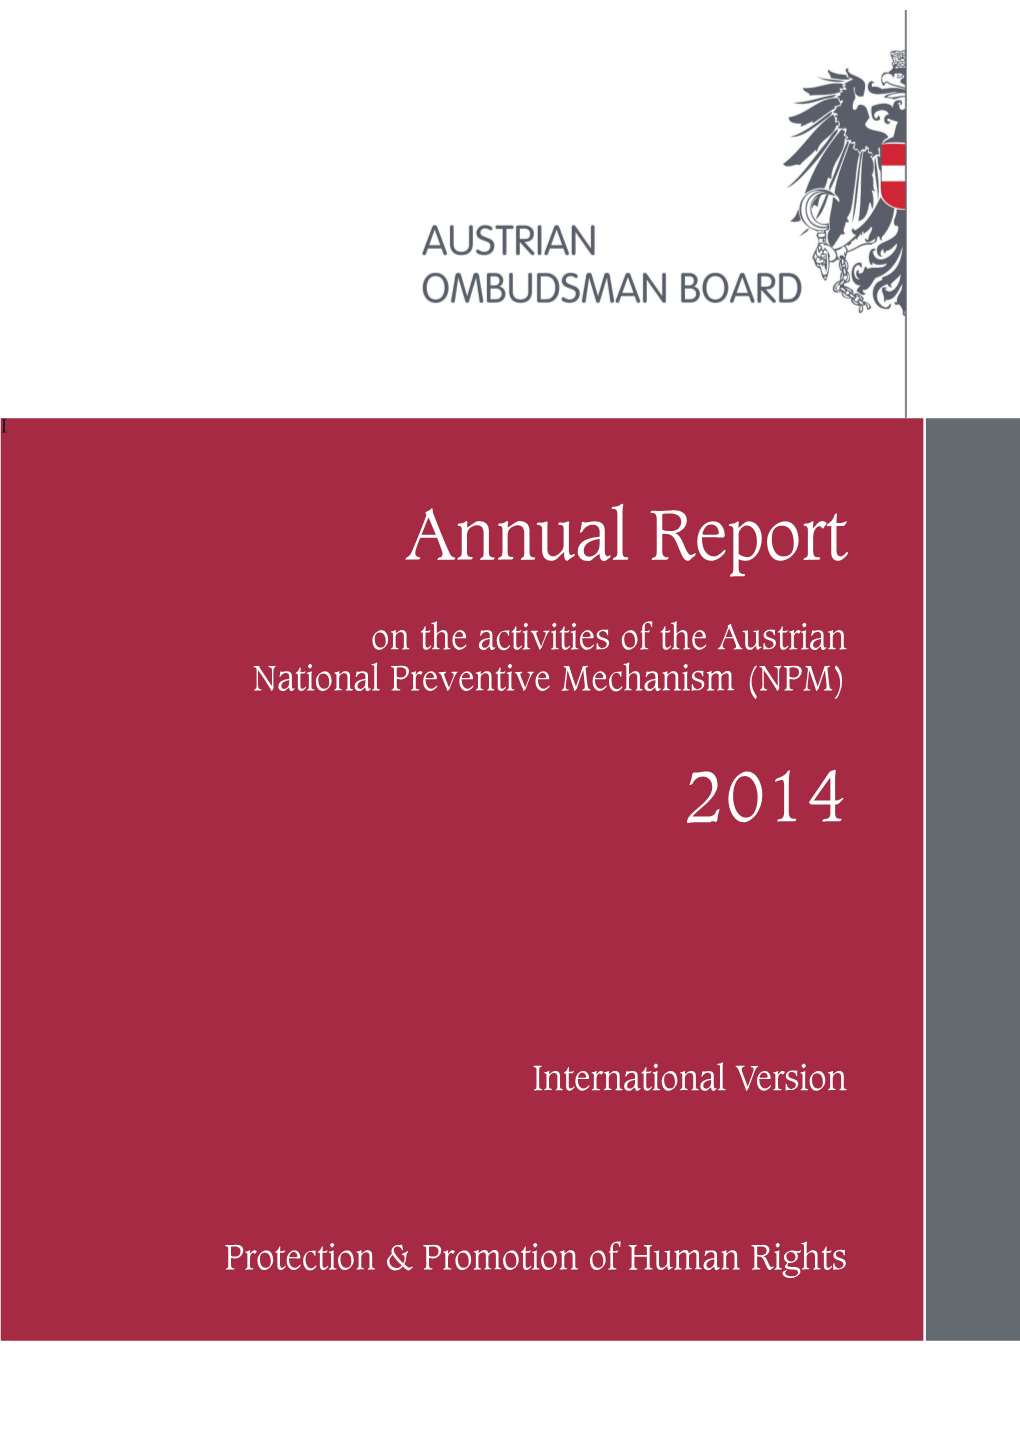 Report of the Austrian Ombudsman Board and Its